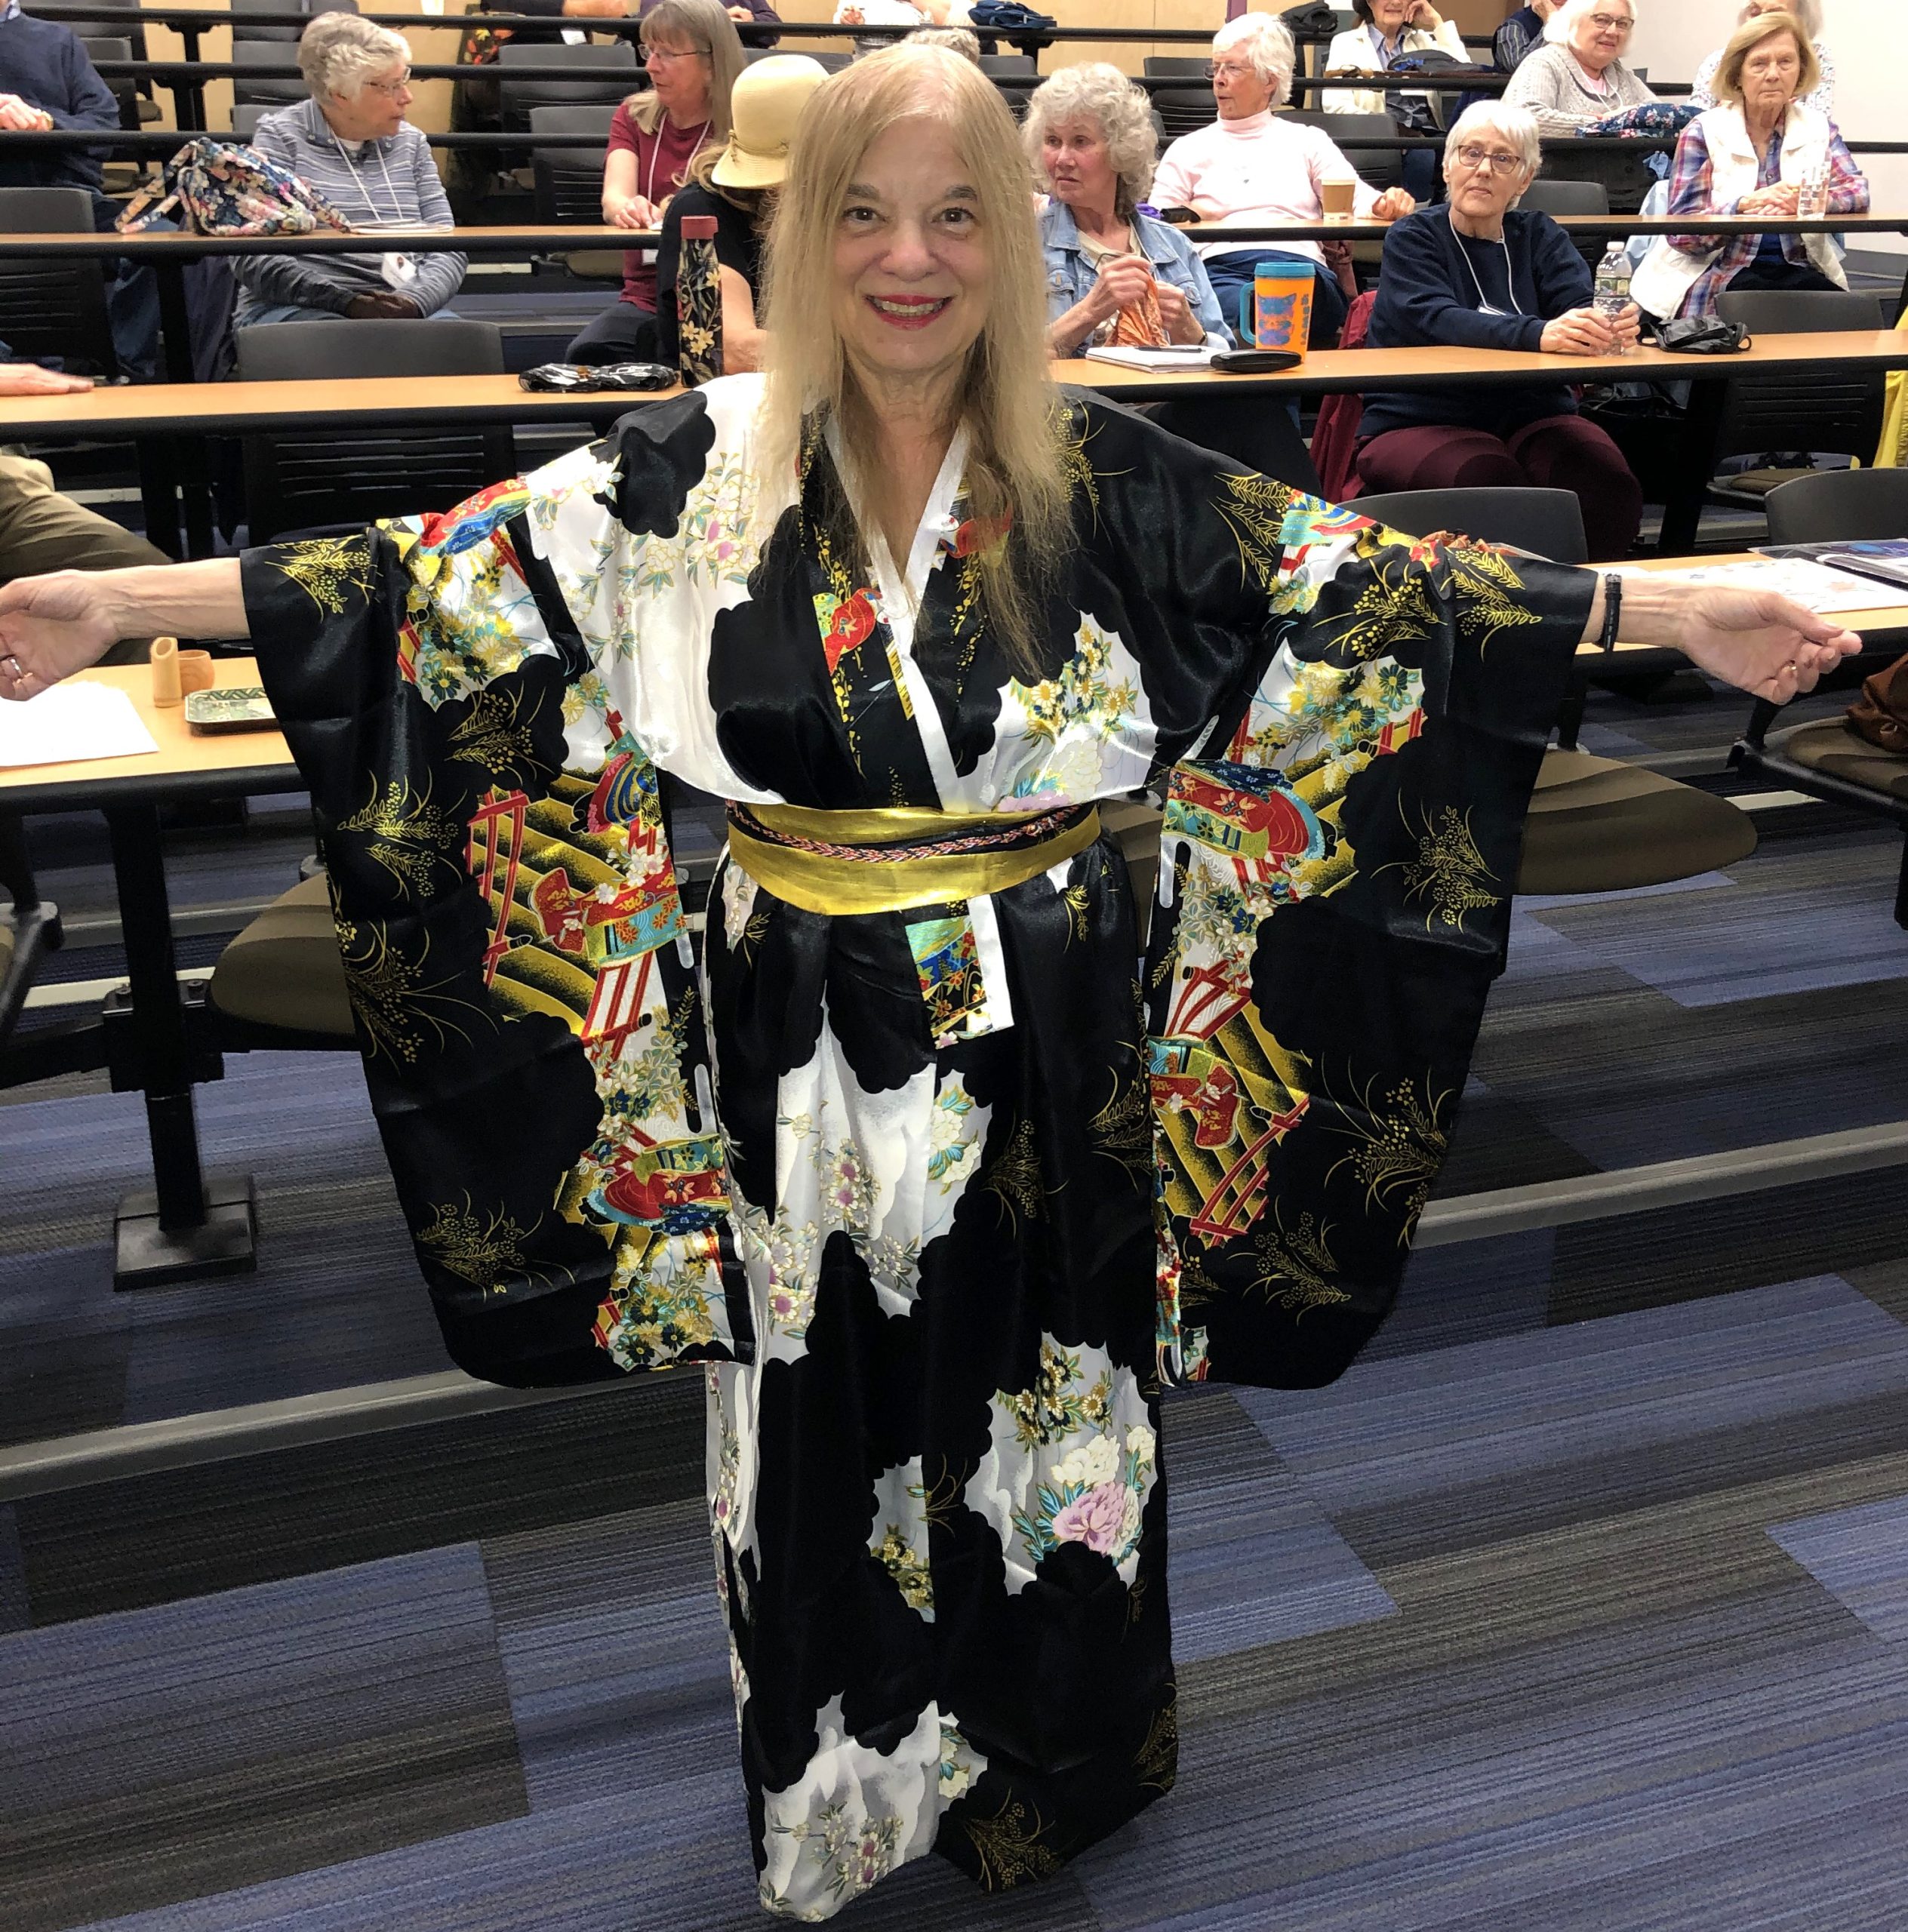 Dana Barry Displays her Kimono while giving a presentation about Japan.